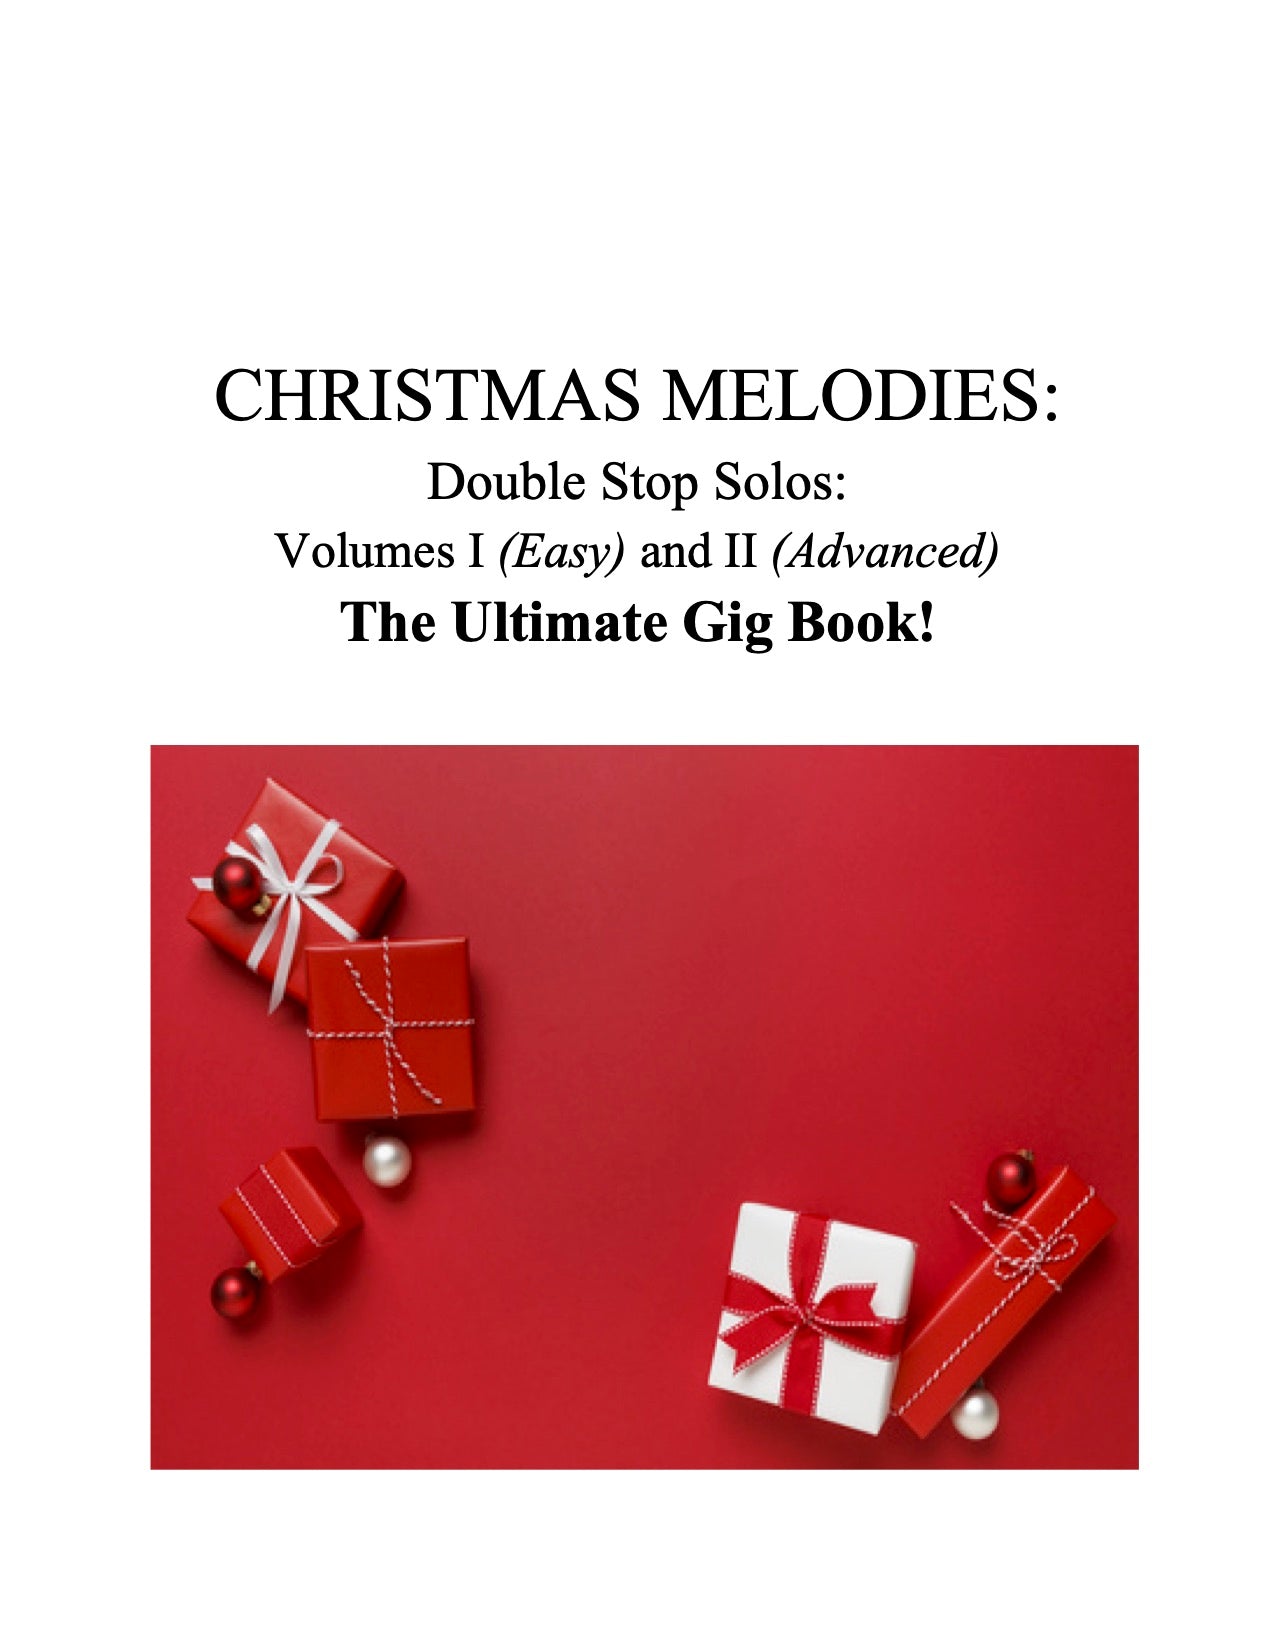 035 - Christmas Melodies: Double Stop Solos I and II: The Ultimate Gig Book!